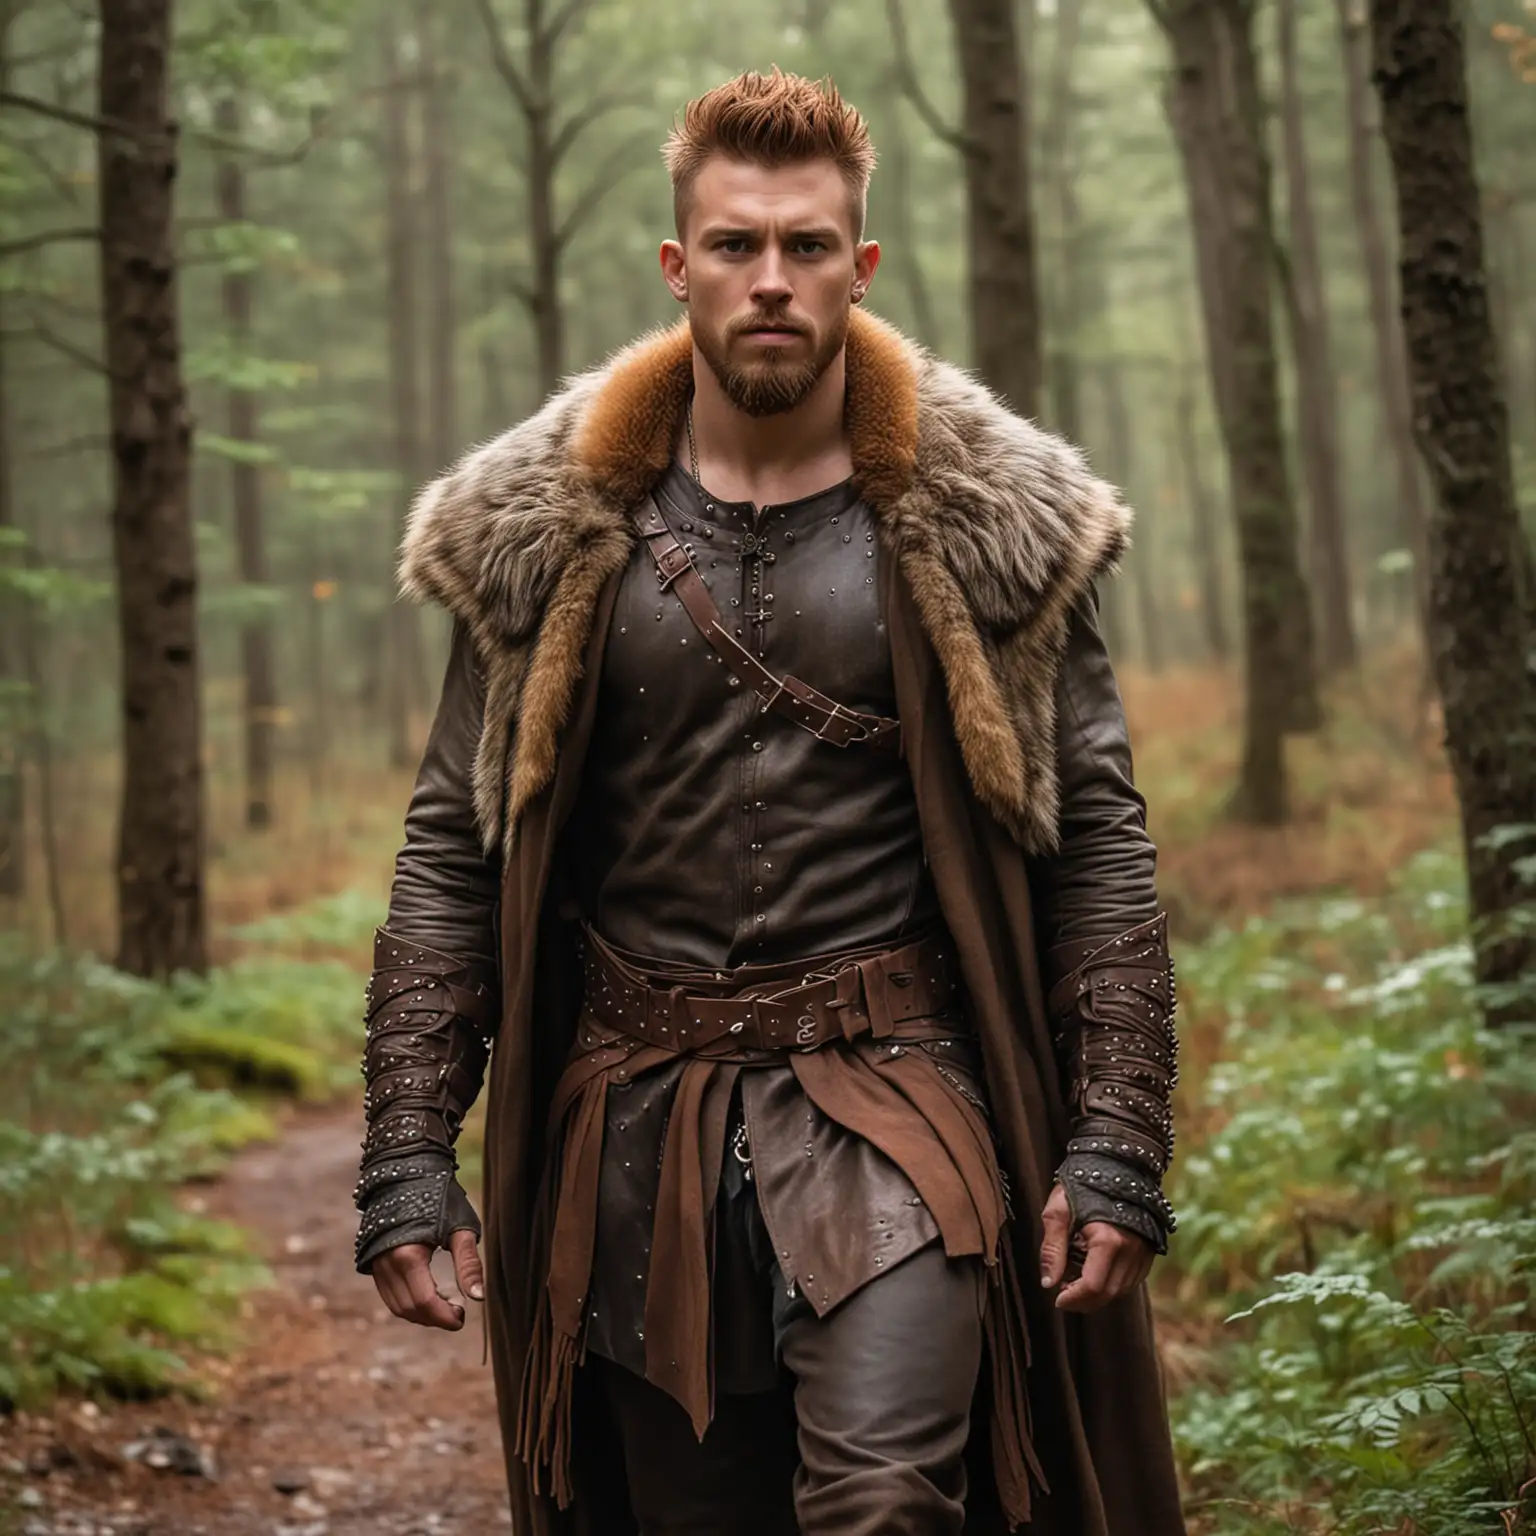 Fantasy Ranger Exploring Forest in Brown Fur Cloak and Leather Armor